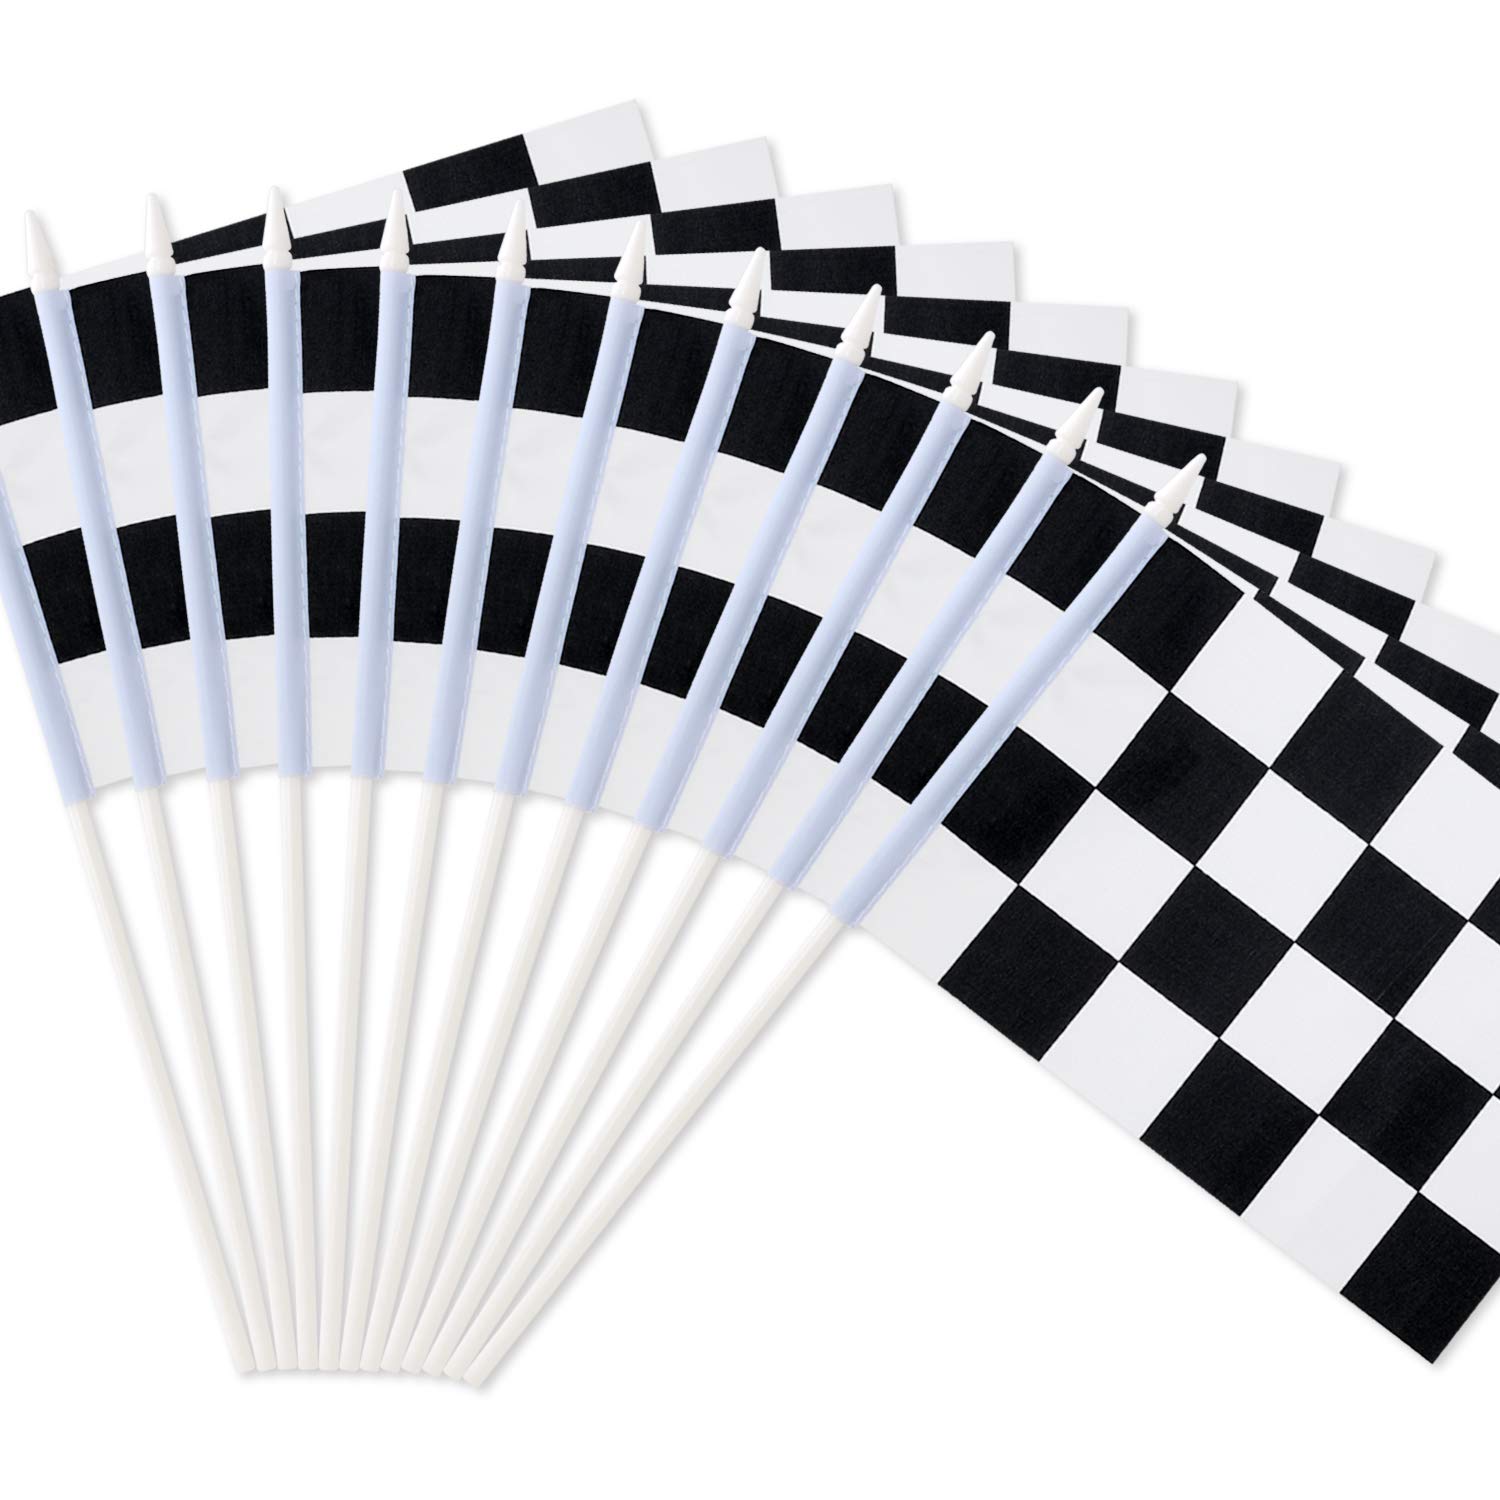 NOVELTY PLACE 8"x5.5" Checkered Black and White Racing Stick Flag - Plastic Stick - Decorations for Racing, Race Car Party, Sport Events (12 Pack)